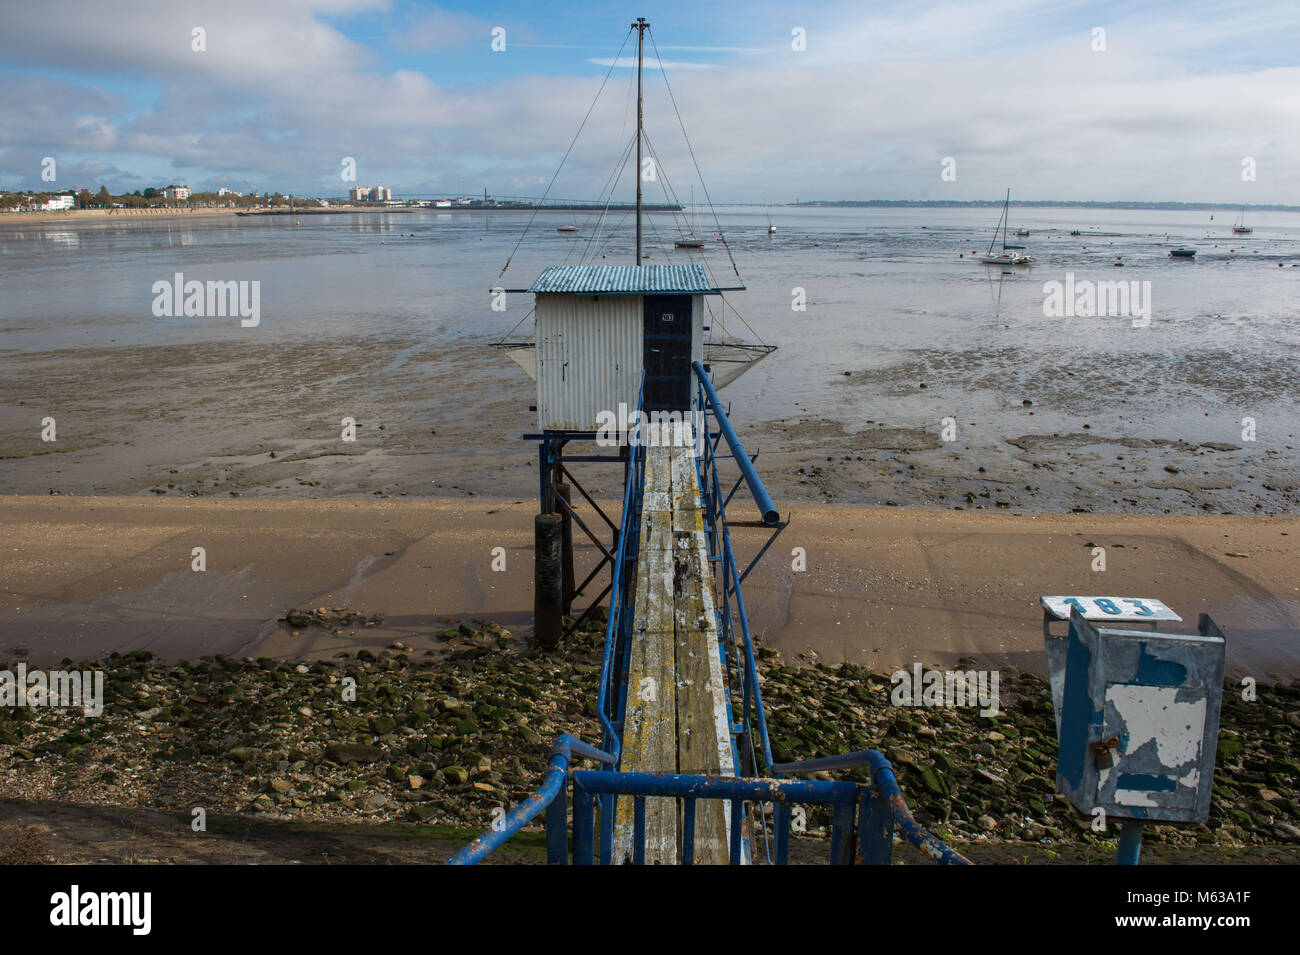 Saint Nazaire, the beach at low tide. France Stock Photo